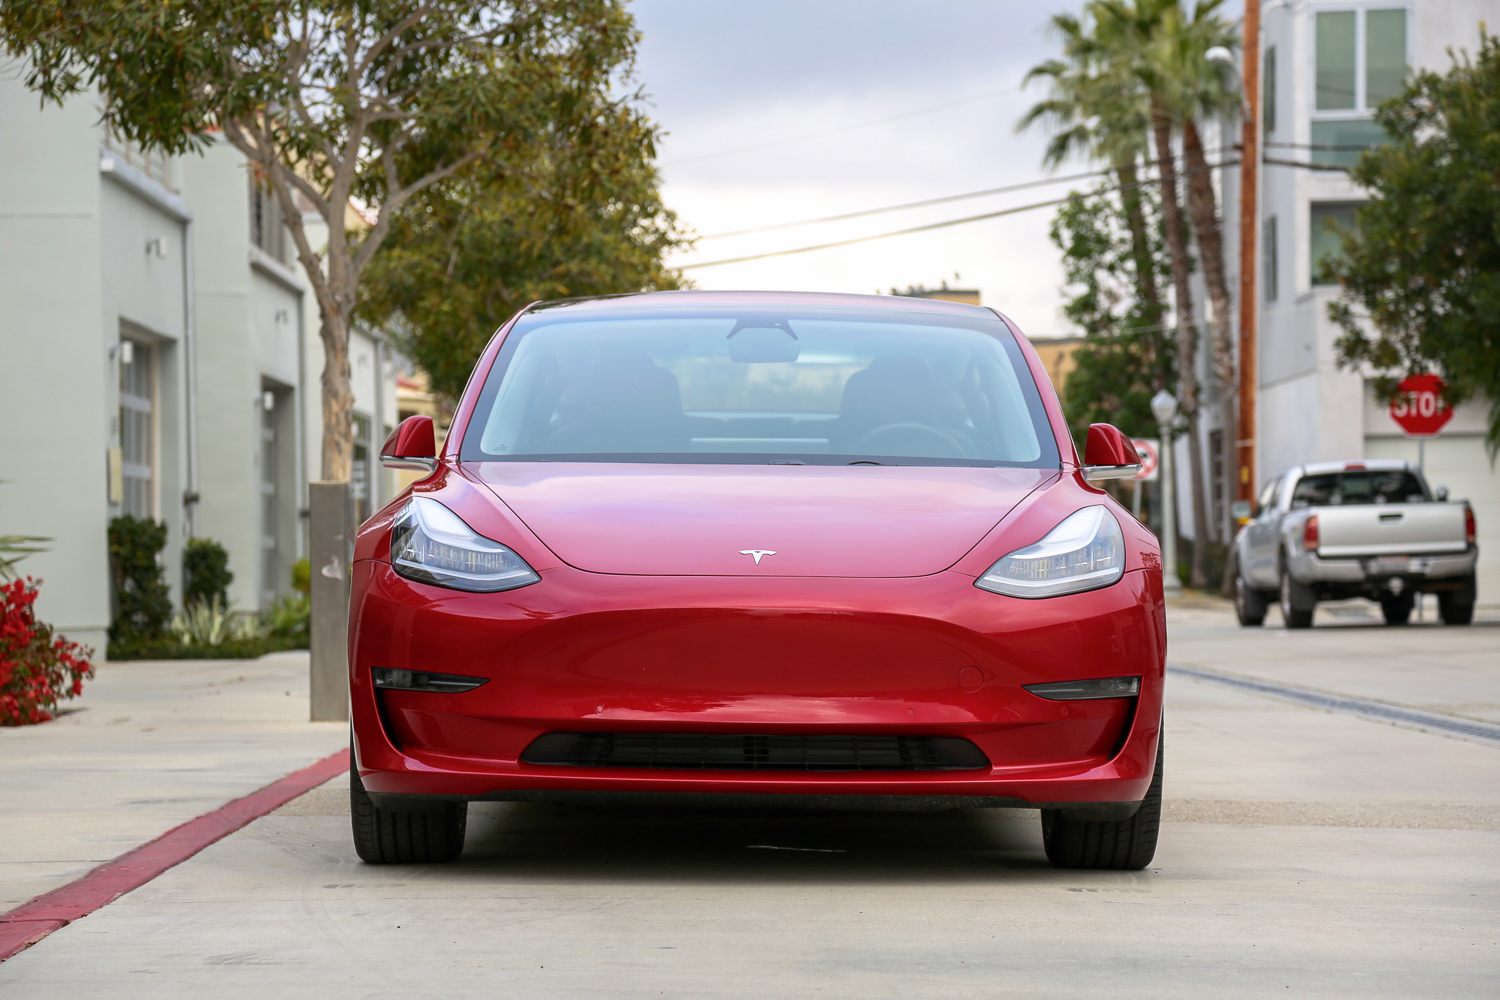 Tesla Model 3 review: A game-changing electric car